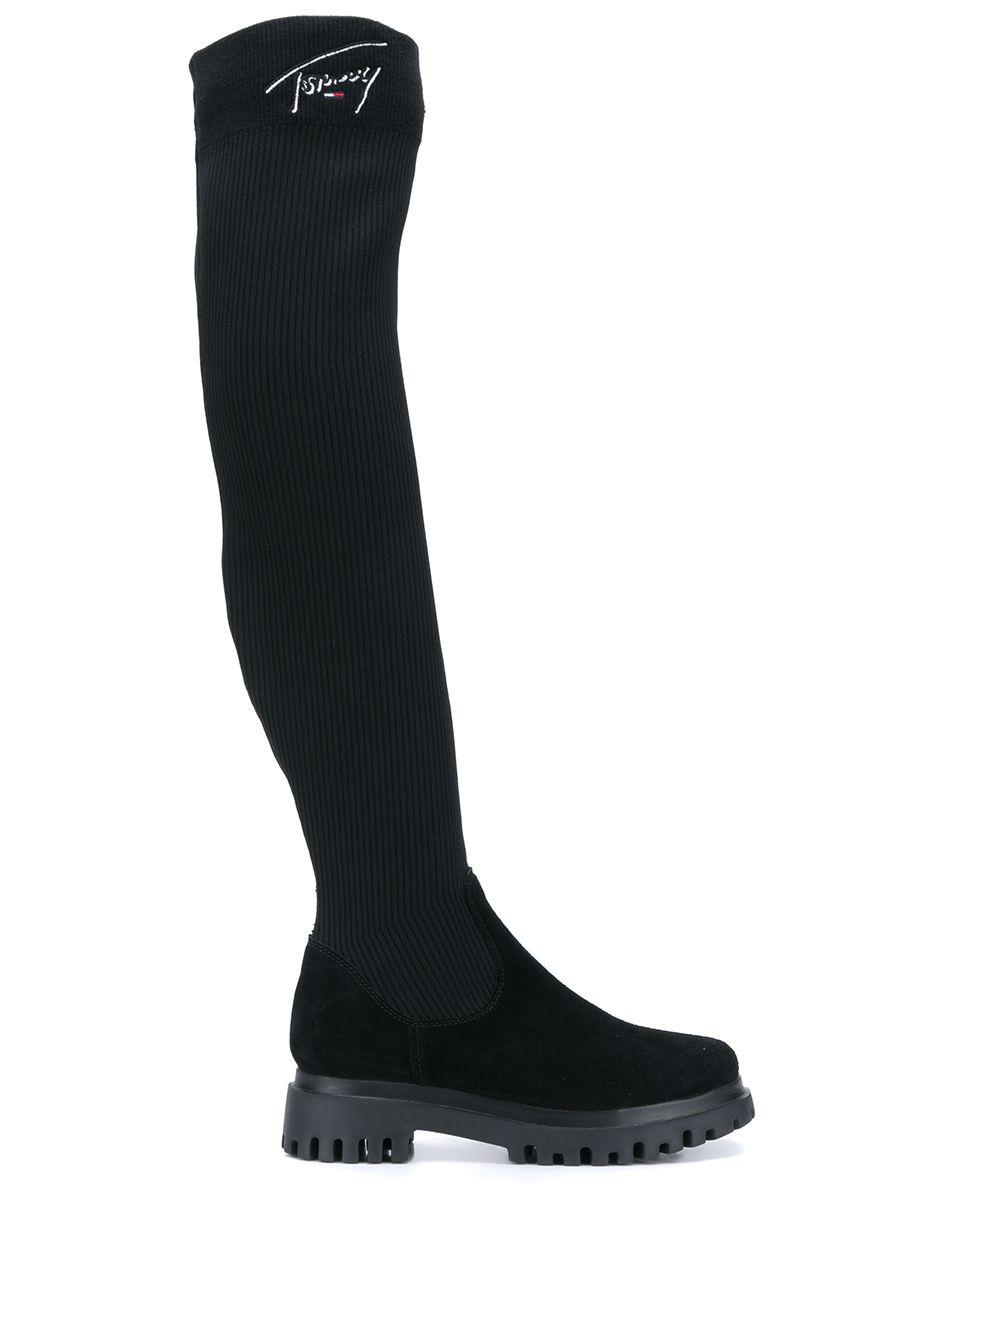 Tommy Hilfiger Denim Over The Knee Sock Boots in Black - Lyst